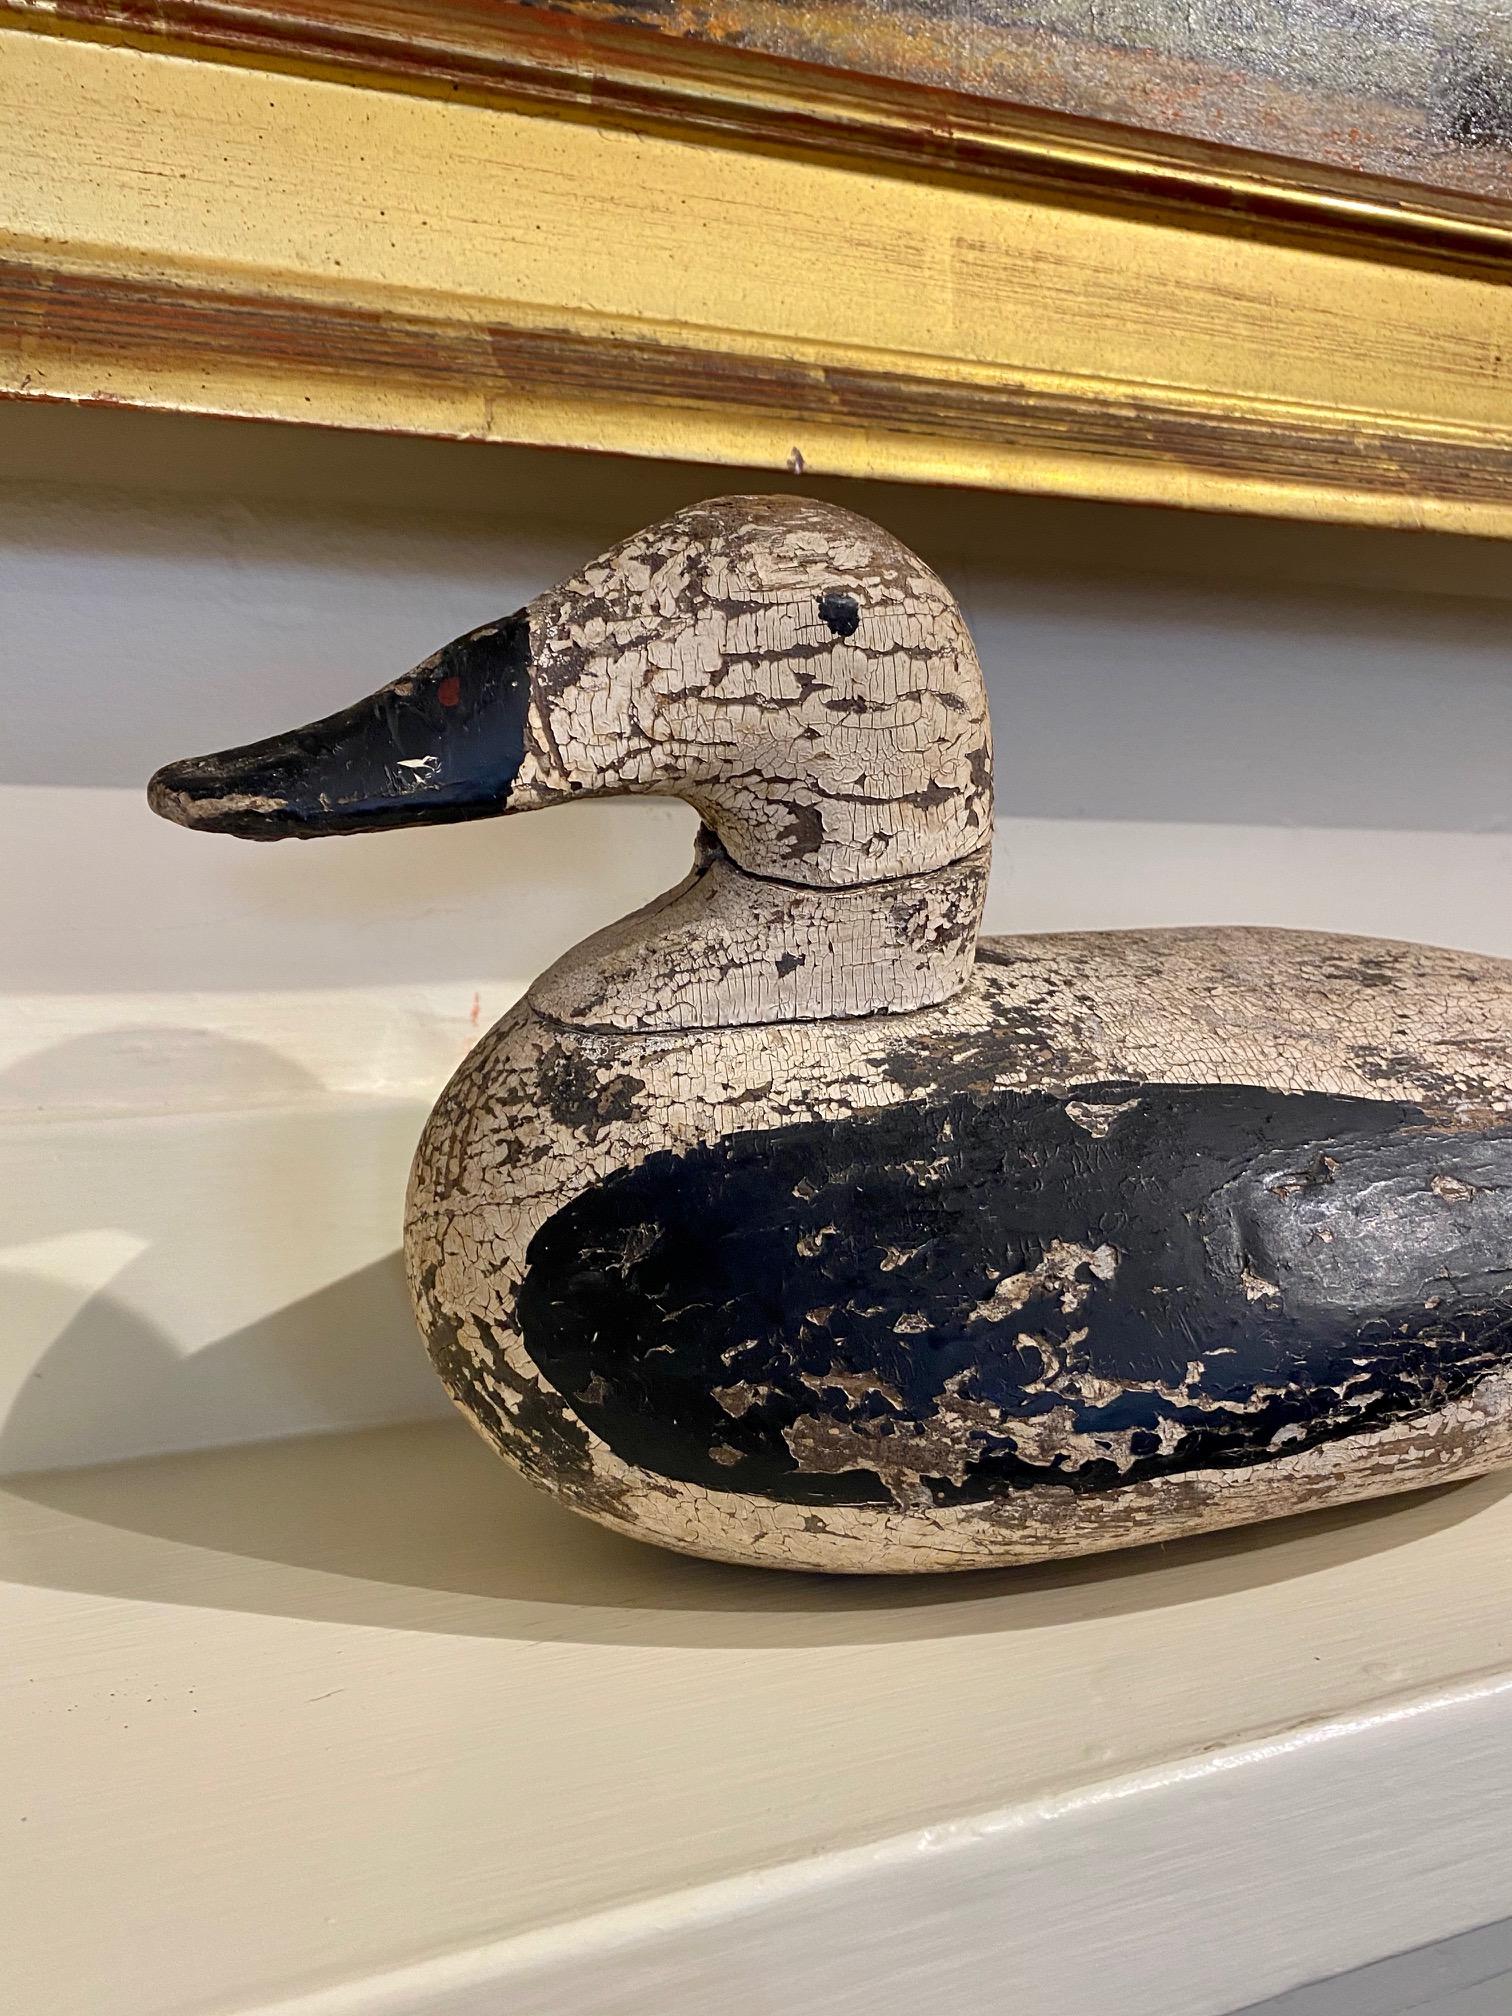 Classic antique Maine Eider Drake Decoy, circa 1920s, with head tucked back in contented posture. Decoy is in well worn original paint with touch-ups to the black areas. The neck has obvious very old crack but is strong and stable. The great painted